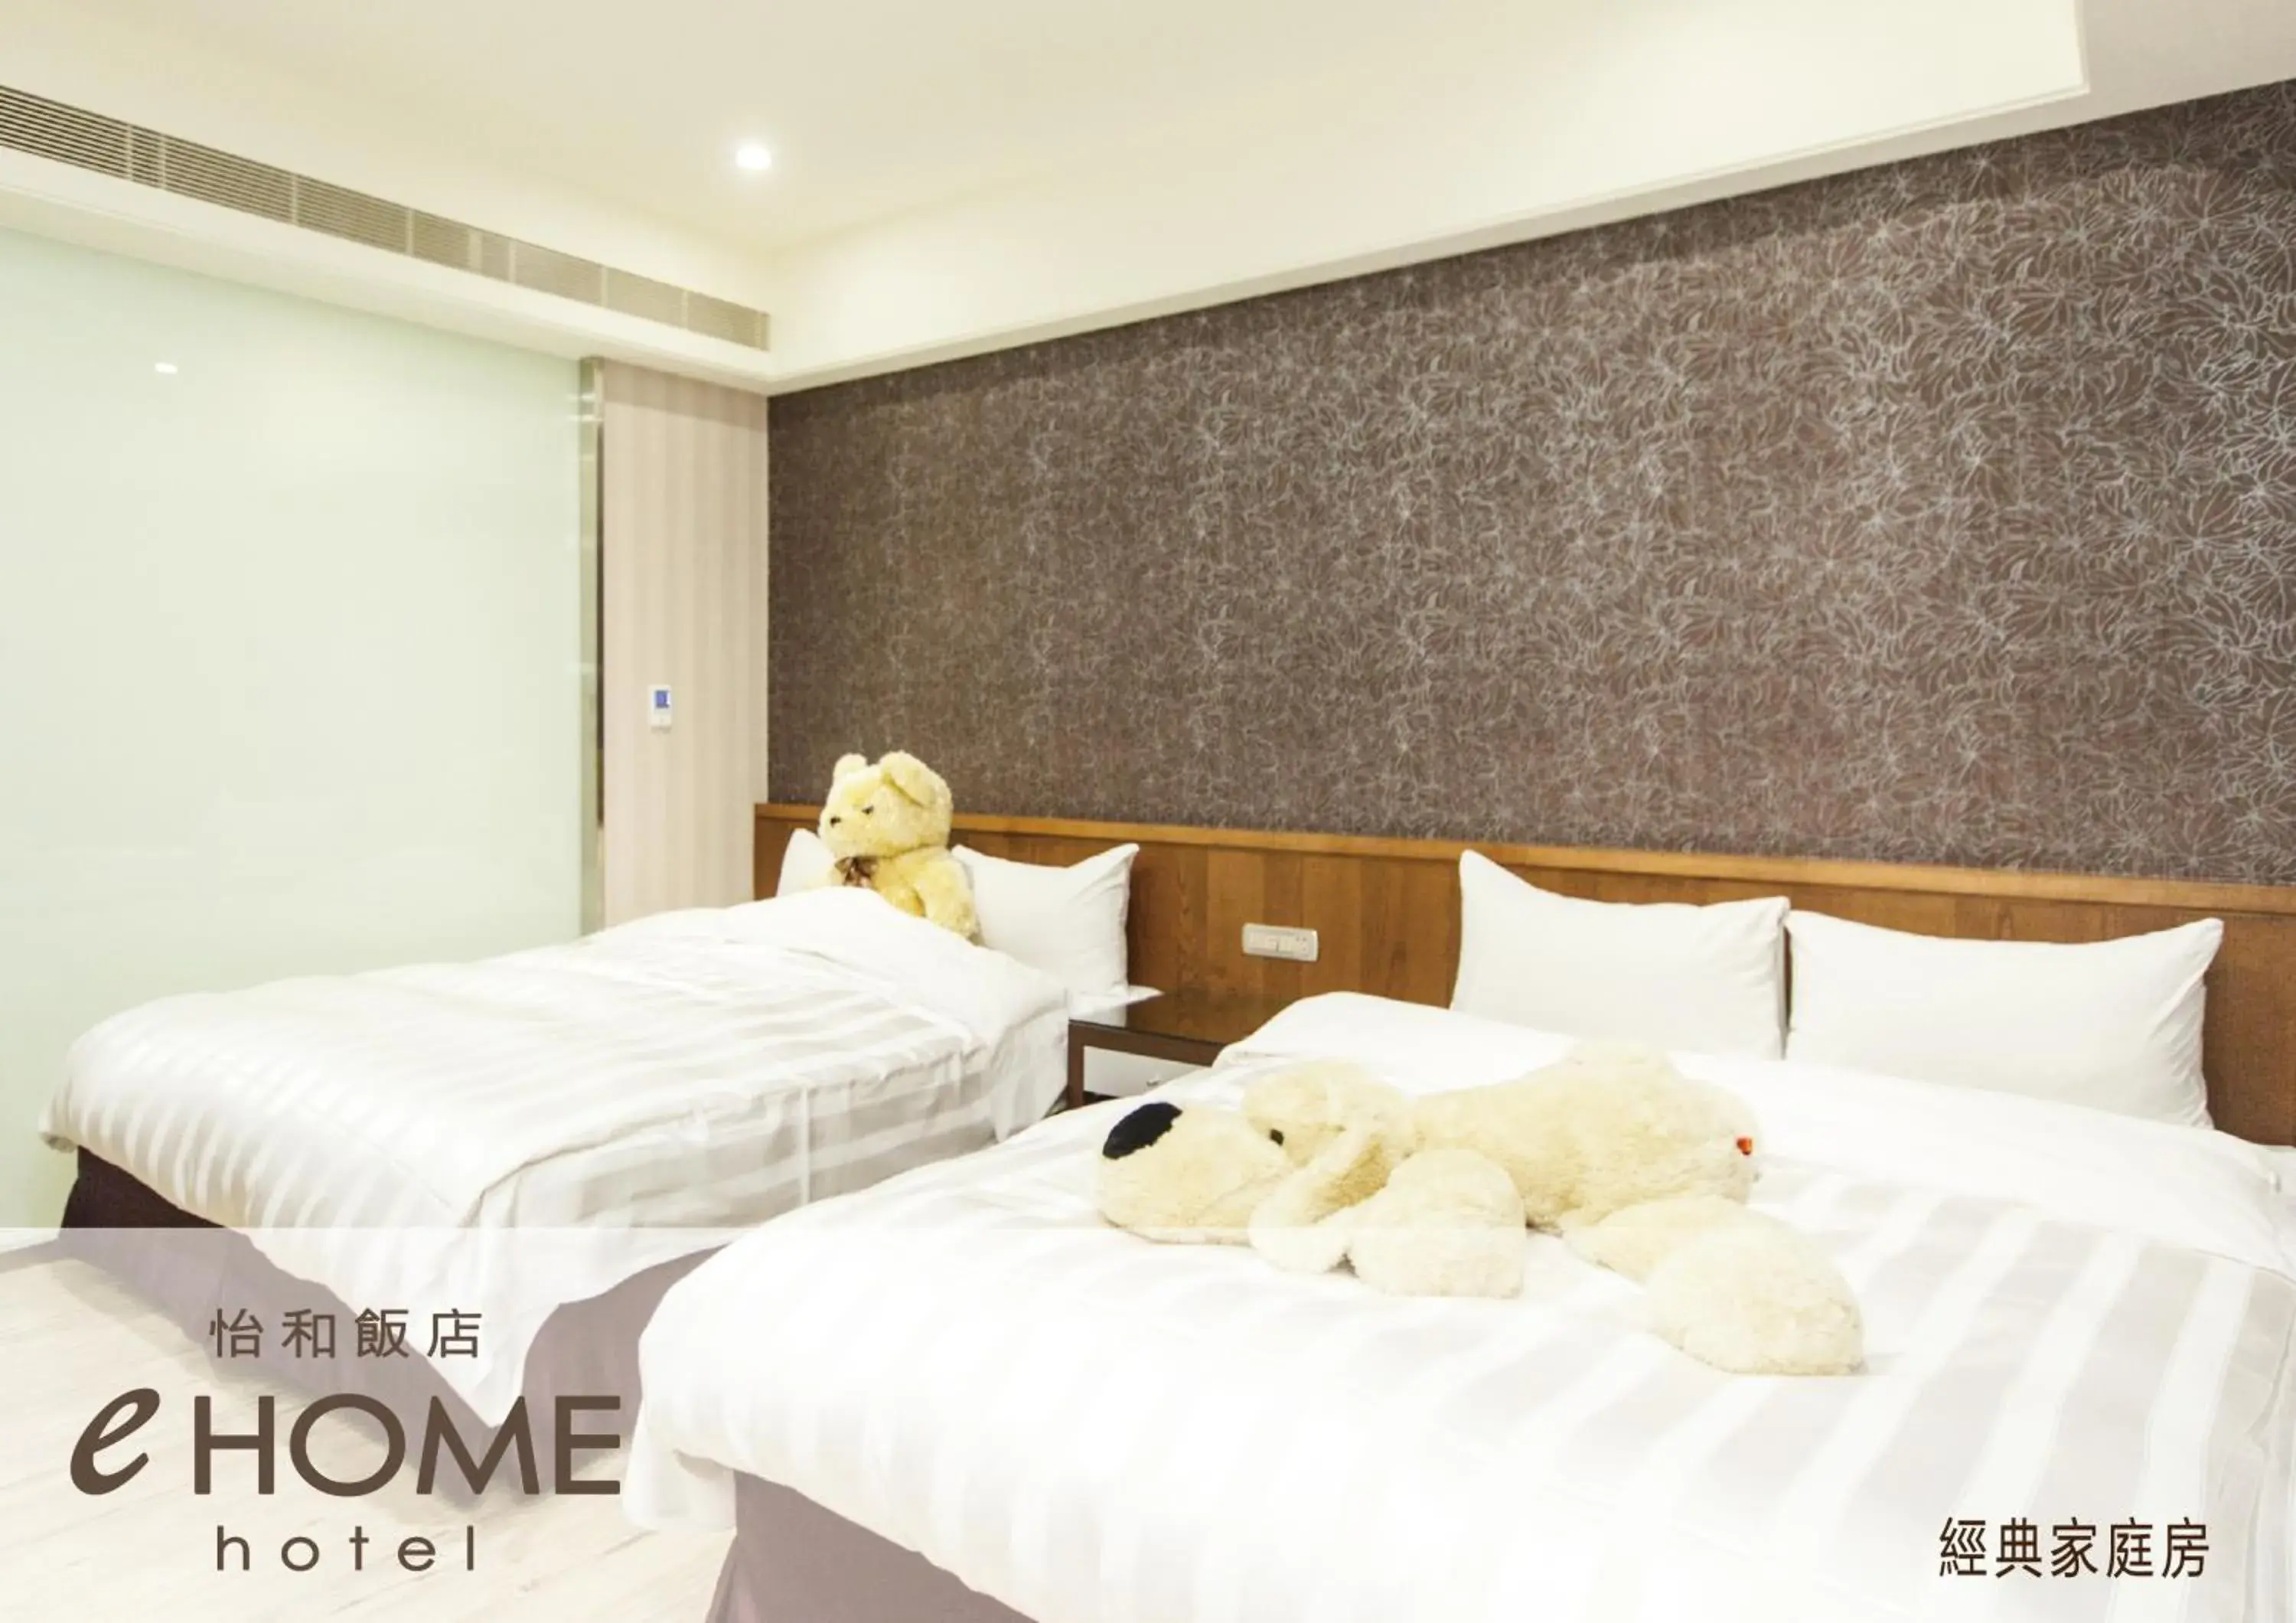 Bed in Ehome Hotel